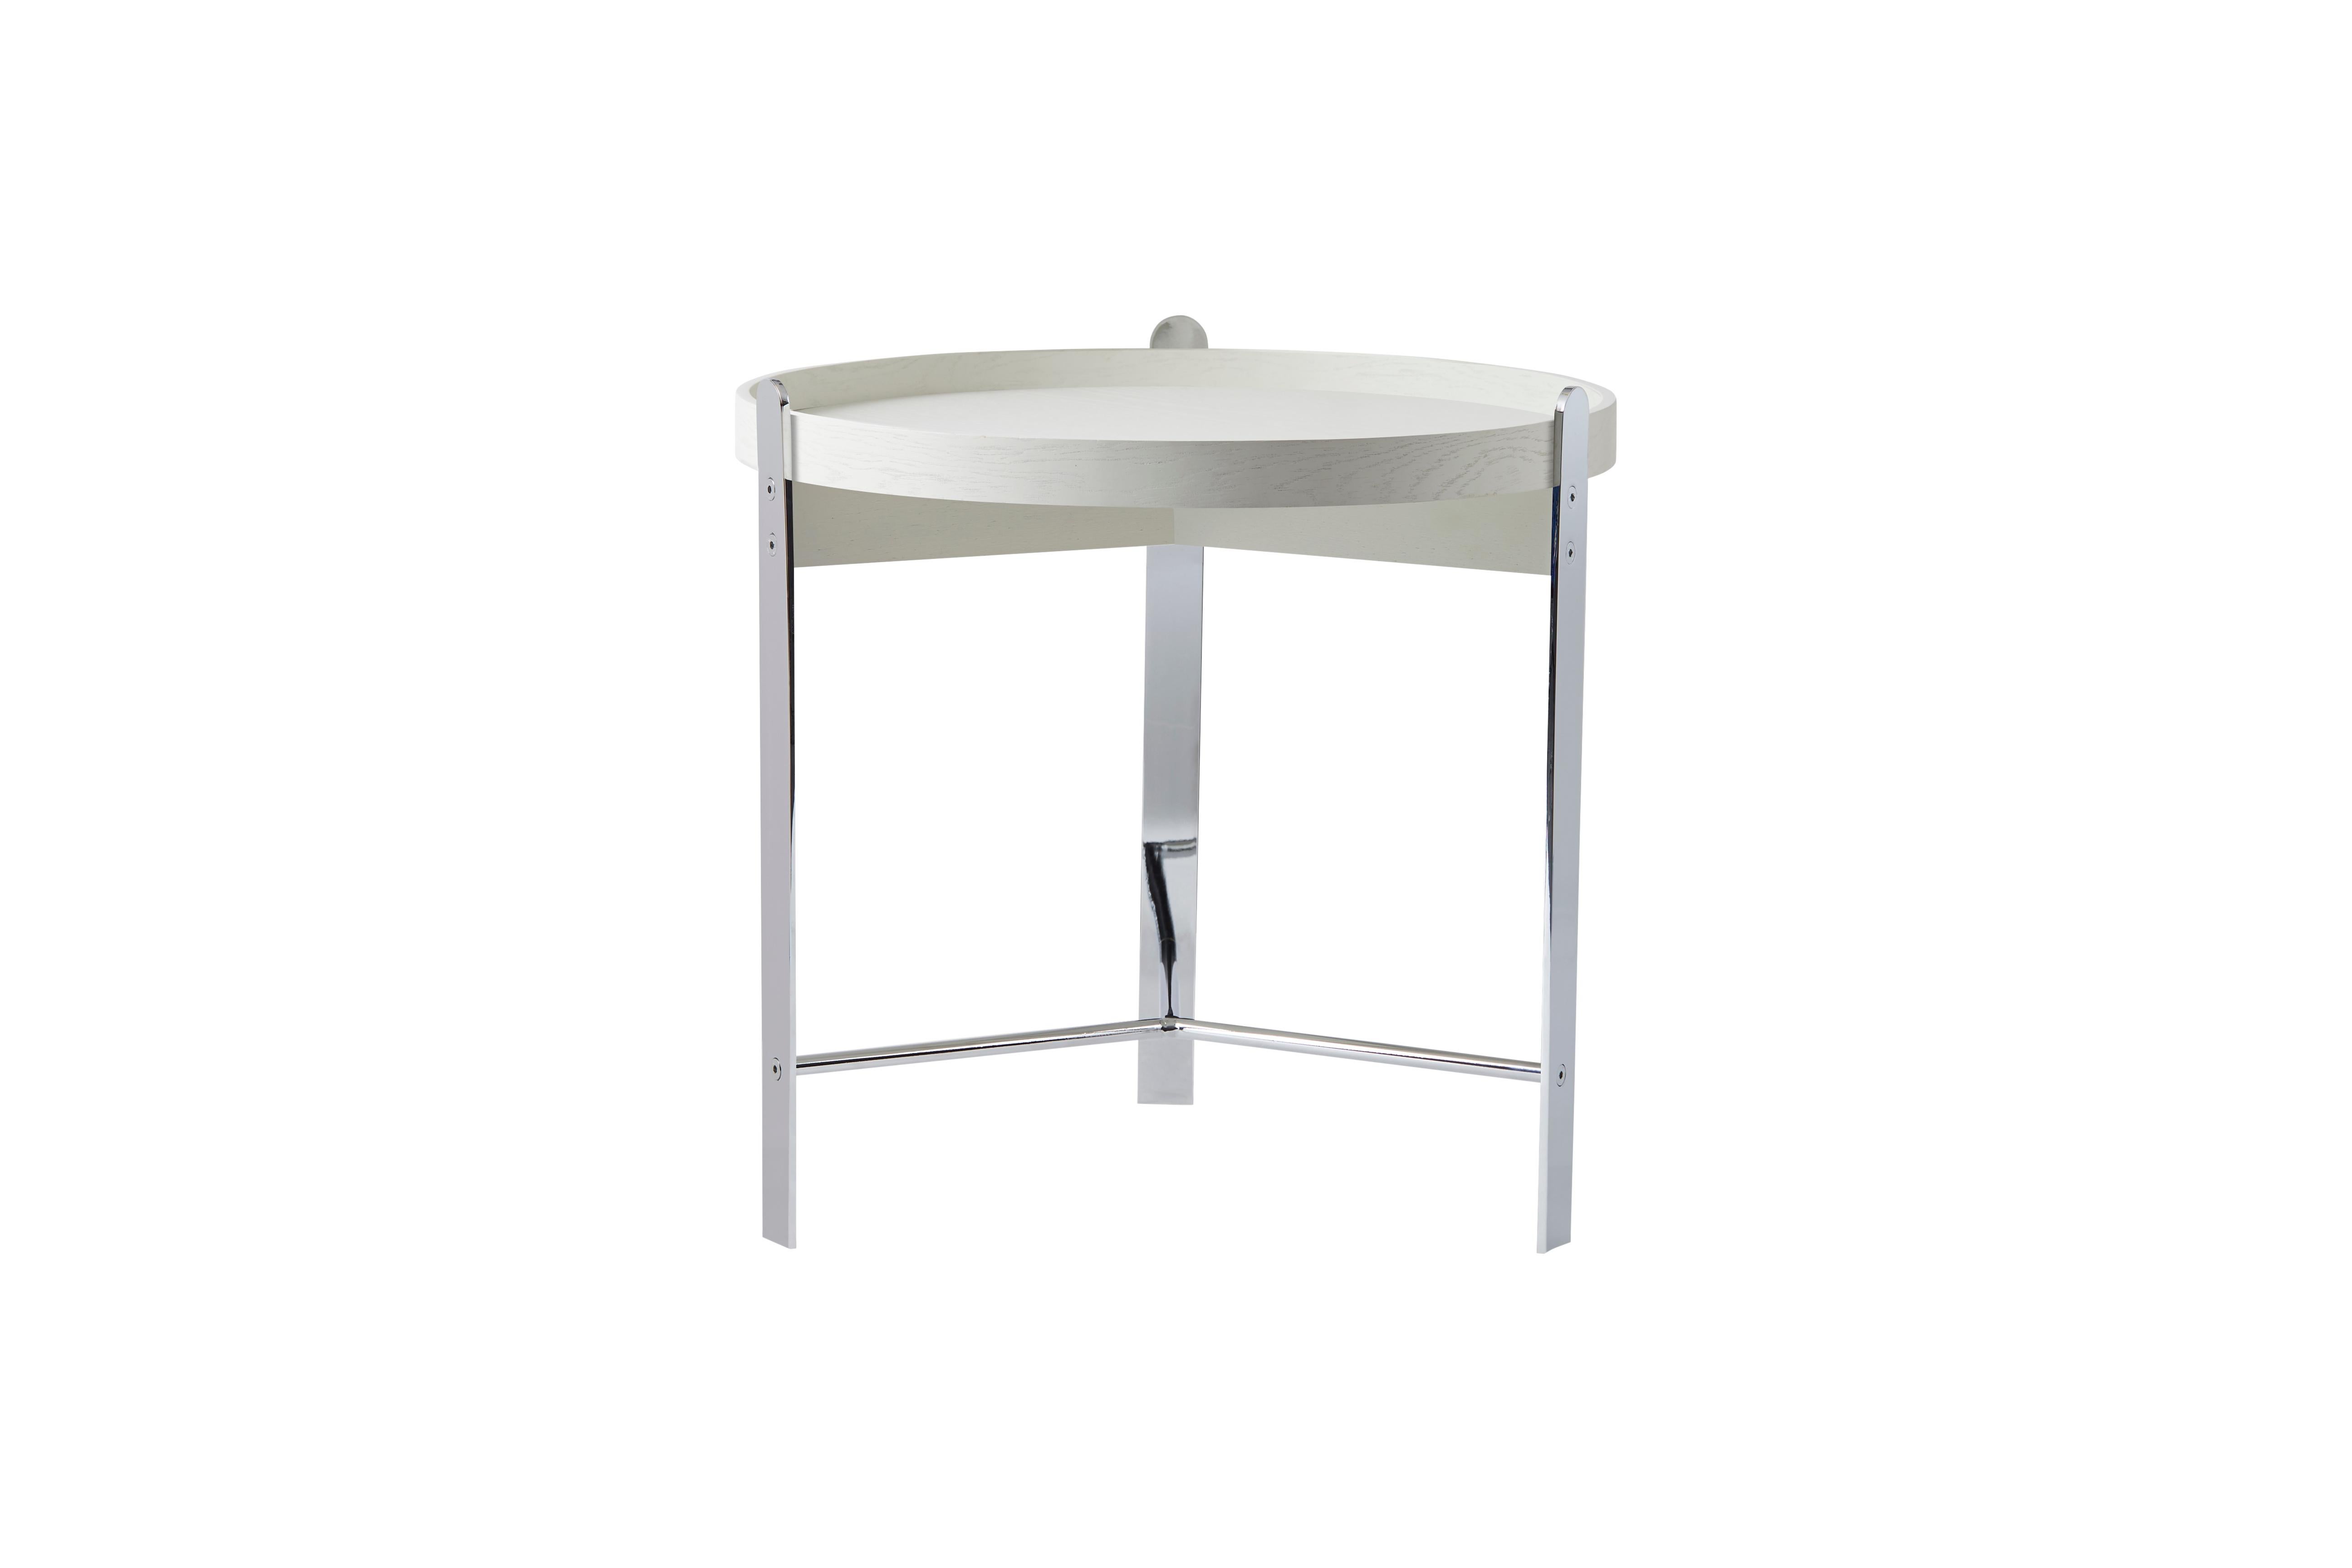 For Sale: White (White Oak/Chrome) Compose Side Table, by Charlotte Høncke from Warm Nordic